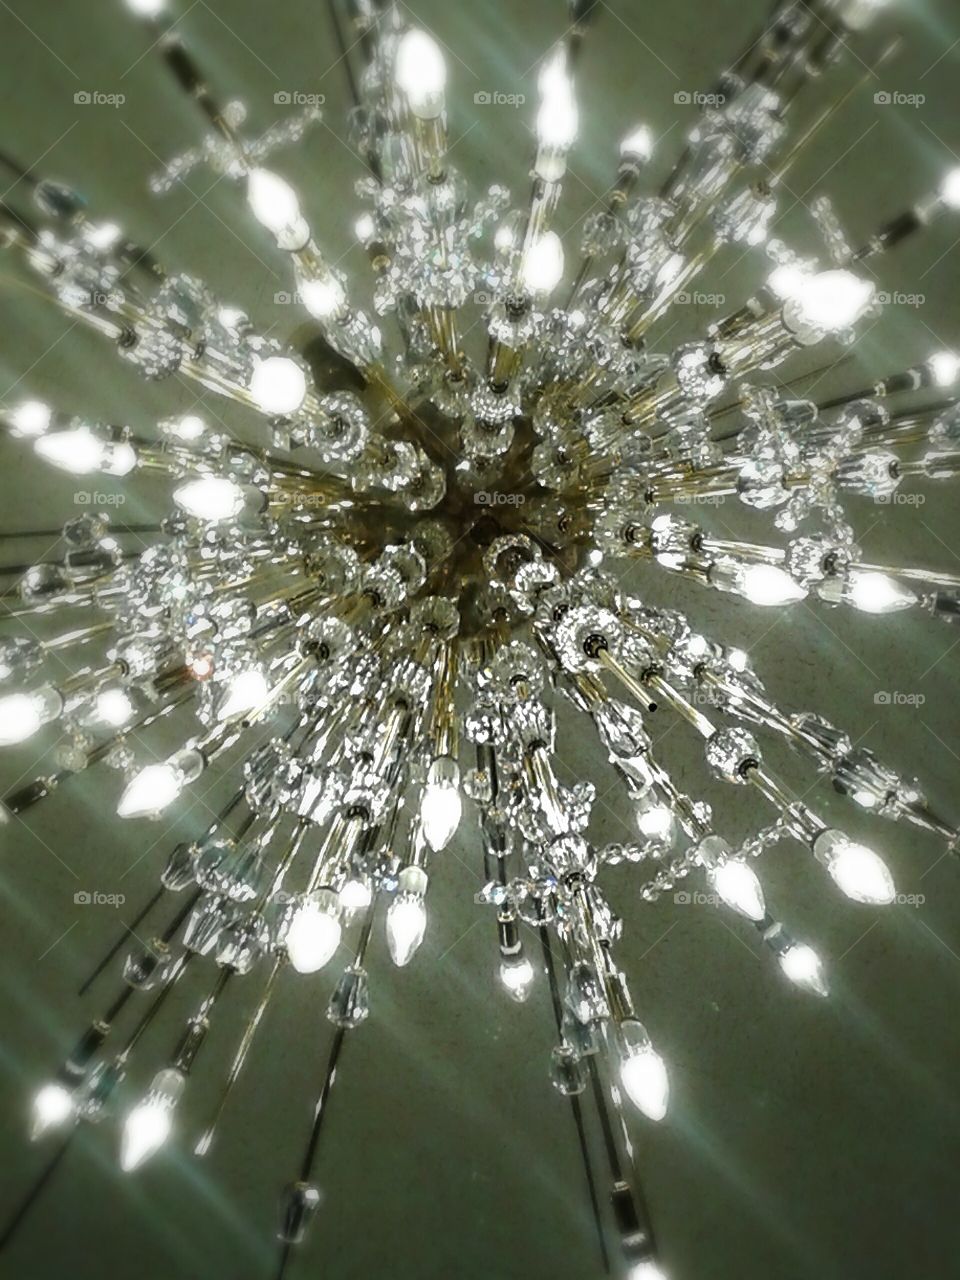 Starburst chandelier. Glorious and sparkling. They are huge and impressive.